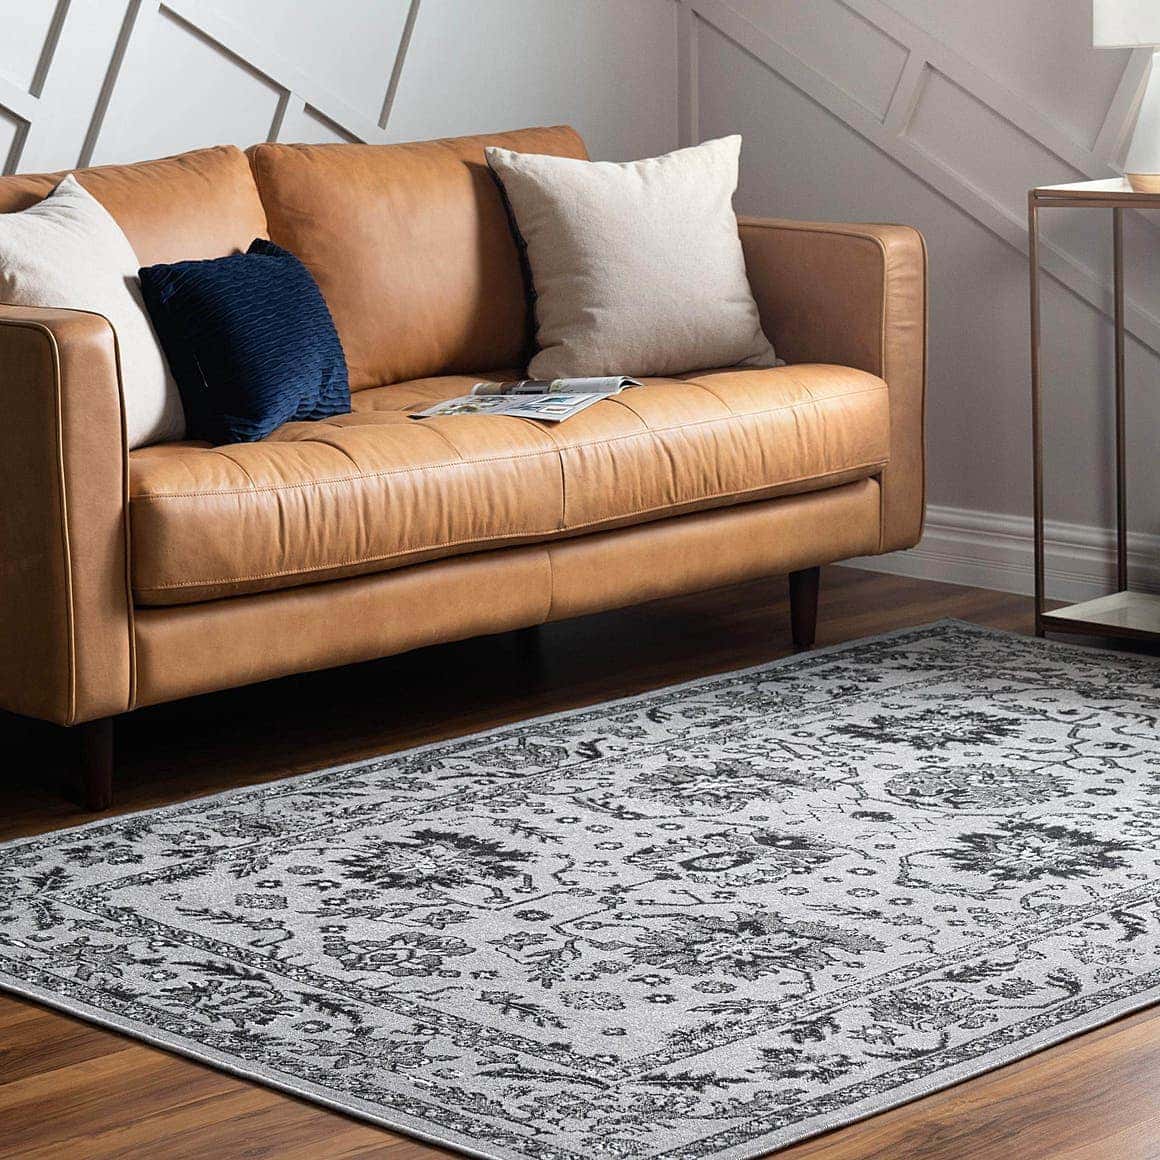 25 Gorgeous Rugs That Go With Brown Couches, Brown Rugs For Living Room